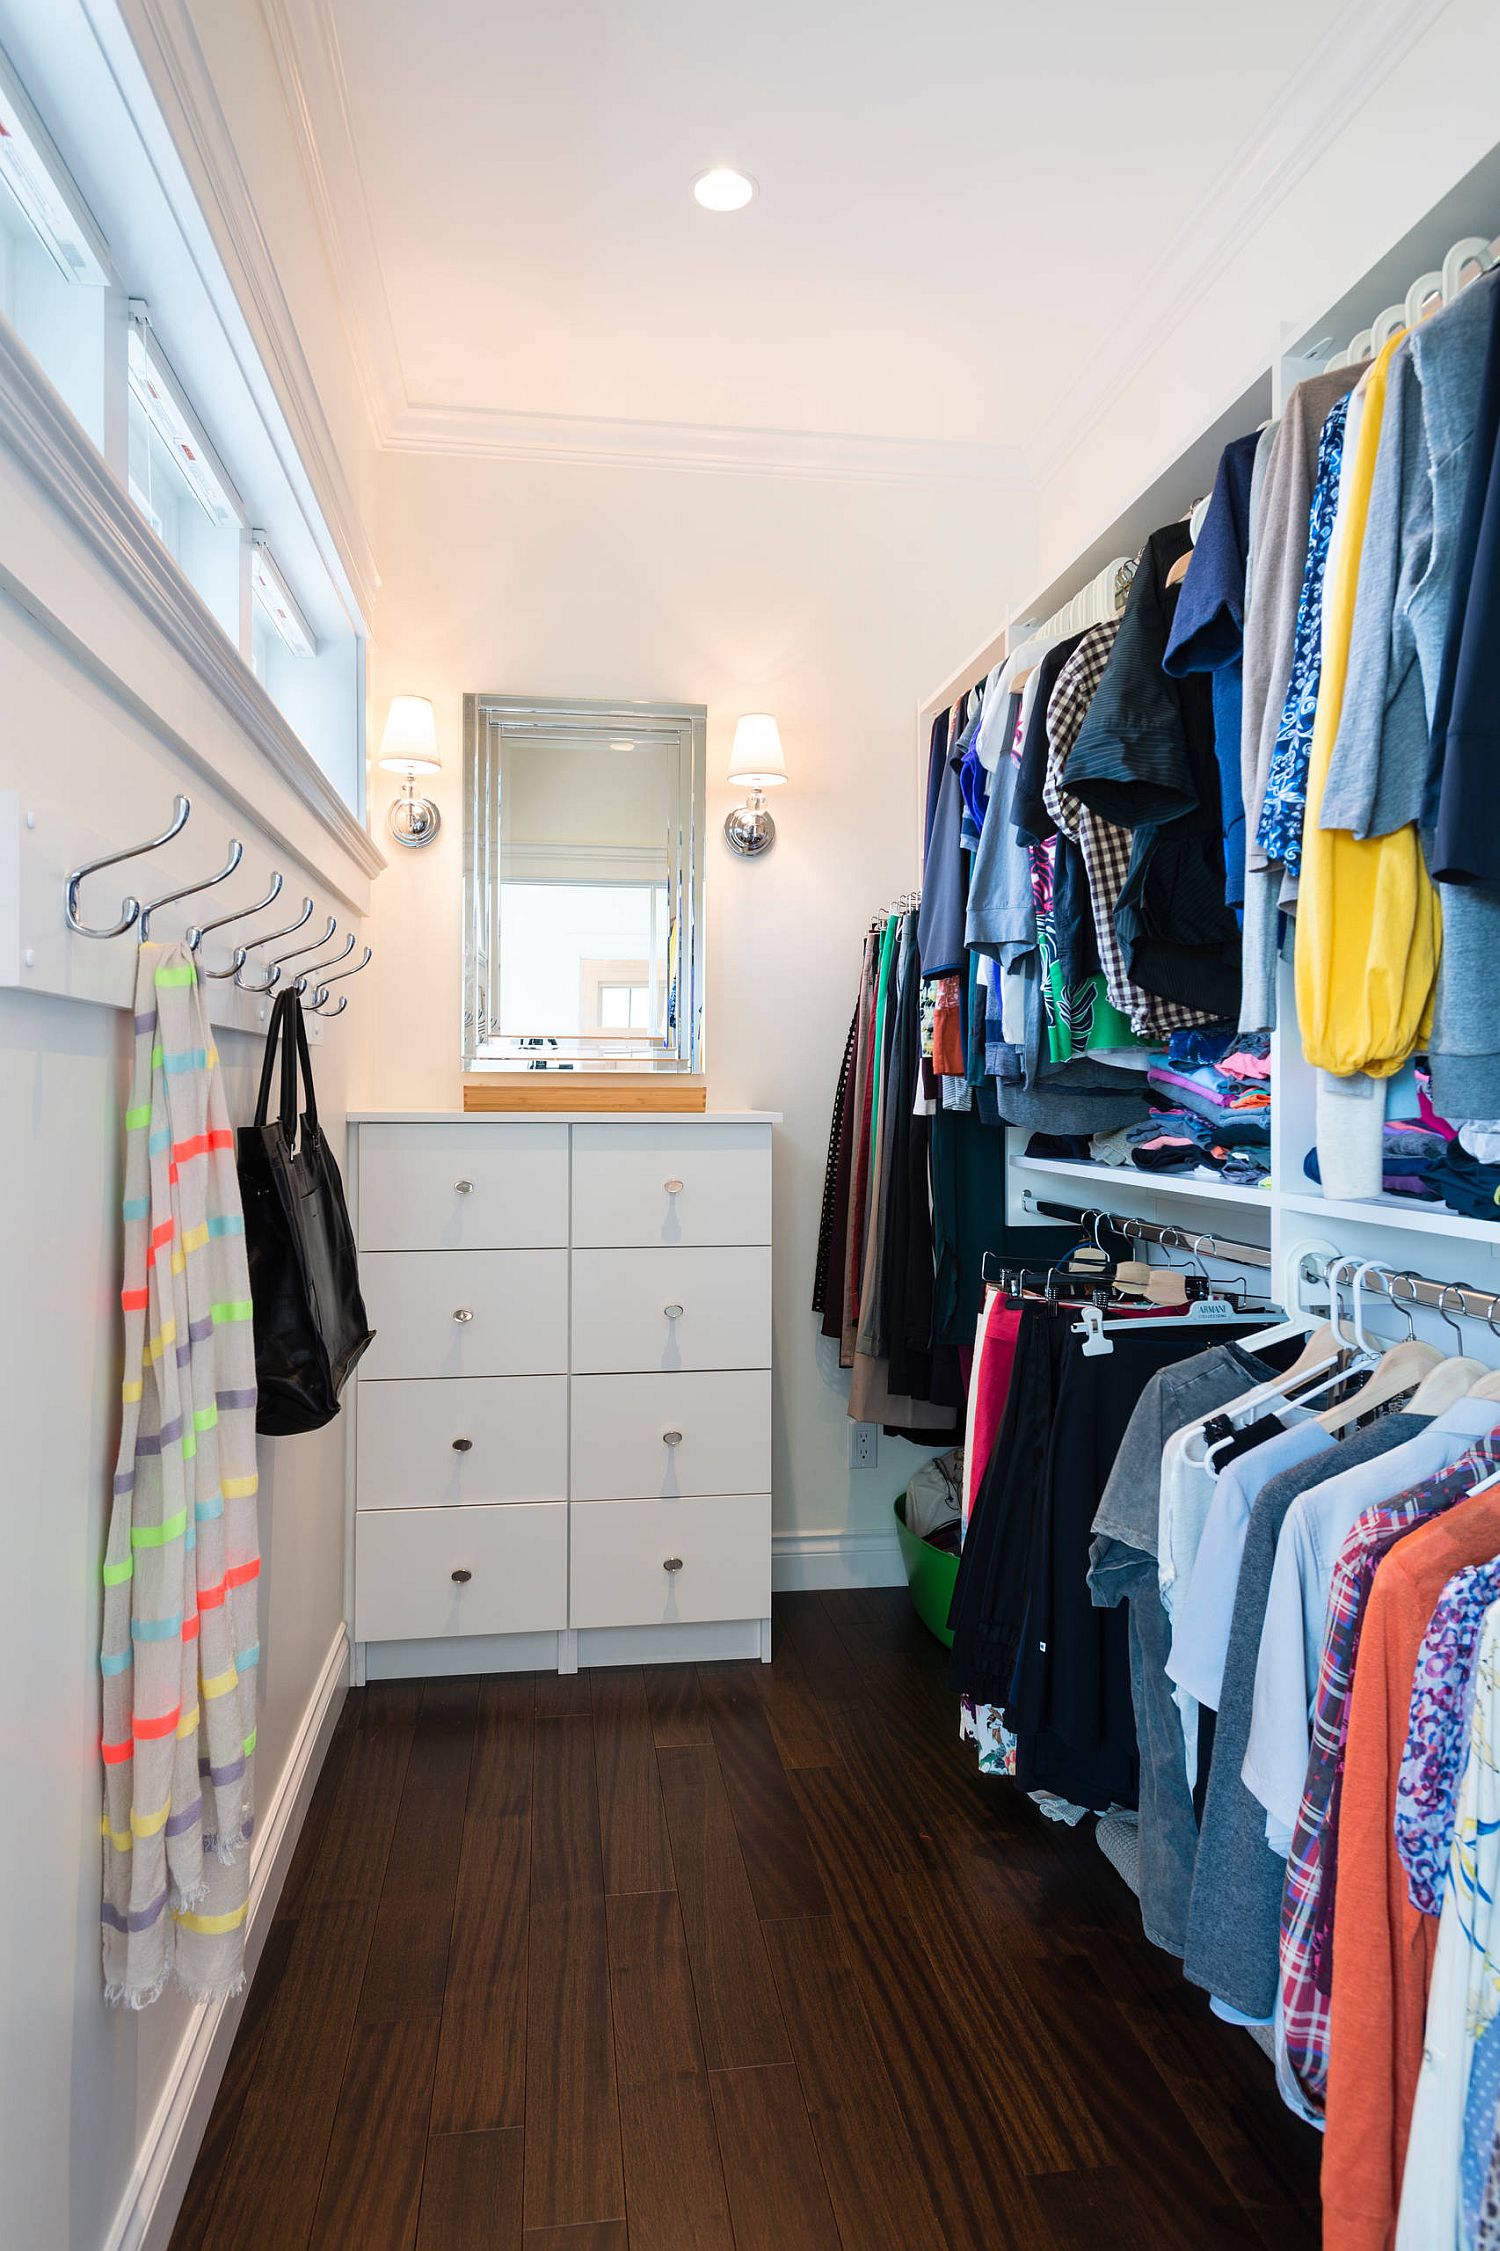 Lighting-makes-a-big-difference-in-the-tiny-bedroom-closet